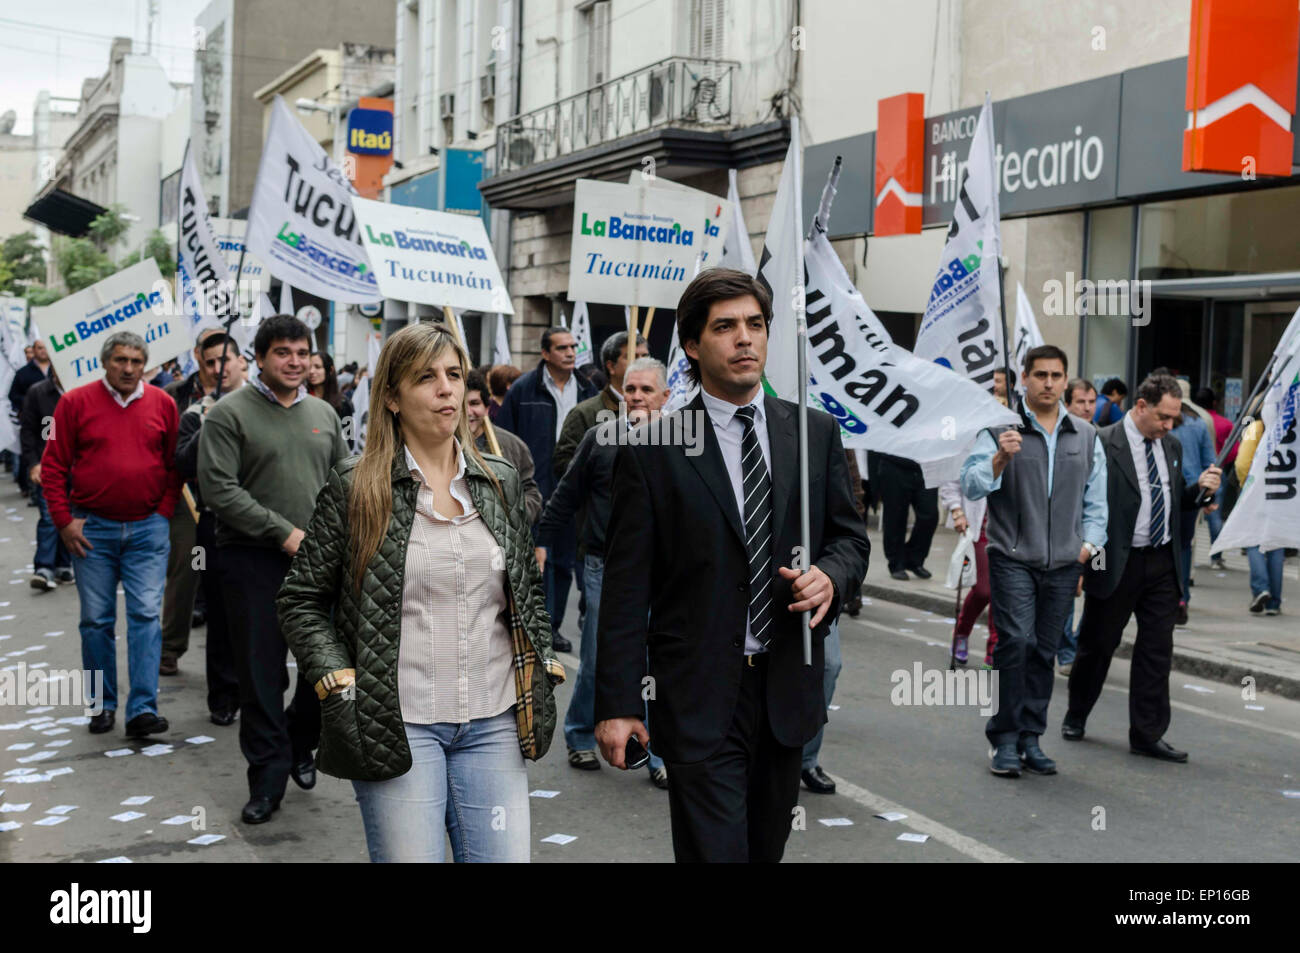 Tucuman, Argentina. 12th May, 2015. People take part during a demonstration in the context of the banking strike, in San Miguel de Tucuman, in Tucuman province, Argentina, on May 12, 2015. Over 100,000 banking employees of Argentina began on Tuesday a new strike for 48 hours, in demand of a pay rise and in rejection of a tax on their salaries. © Julio Pantoja/TELAM/Xinhua/Alamy Live News Stock Photo